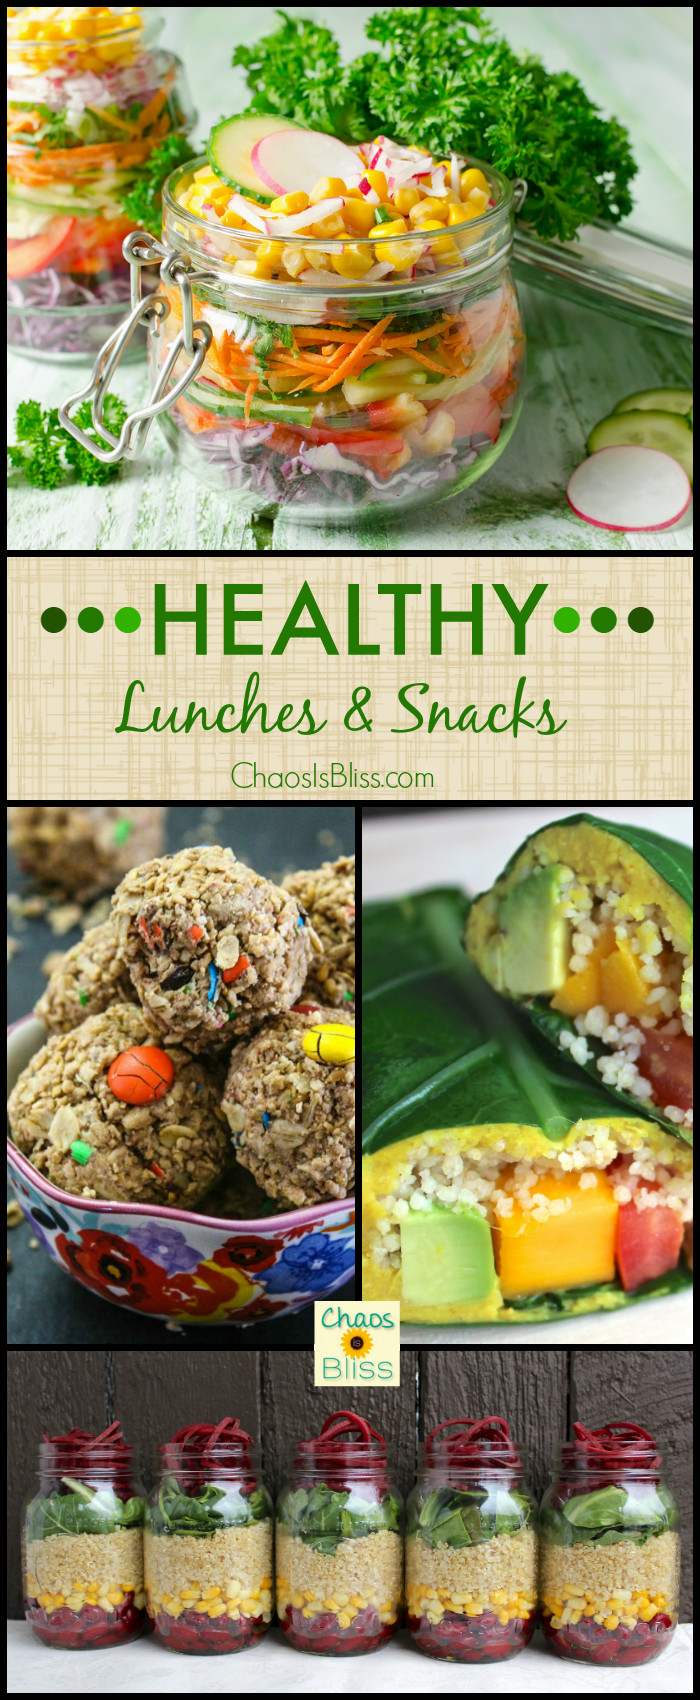 Healthy Snacks To Take To Work
 Healthy Lunches & Snacks when you Work from Home